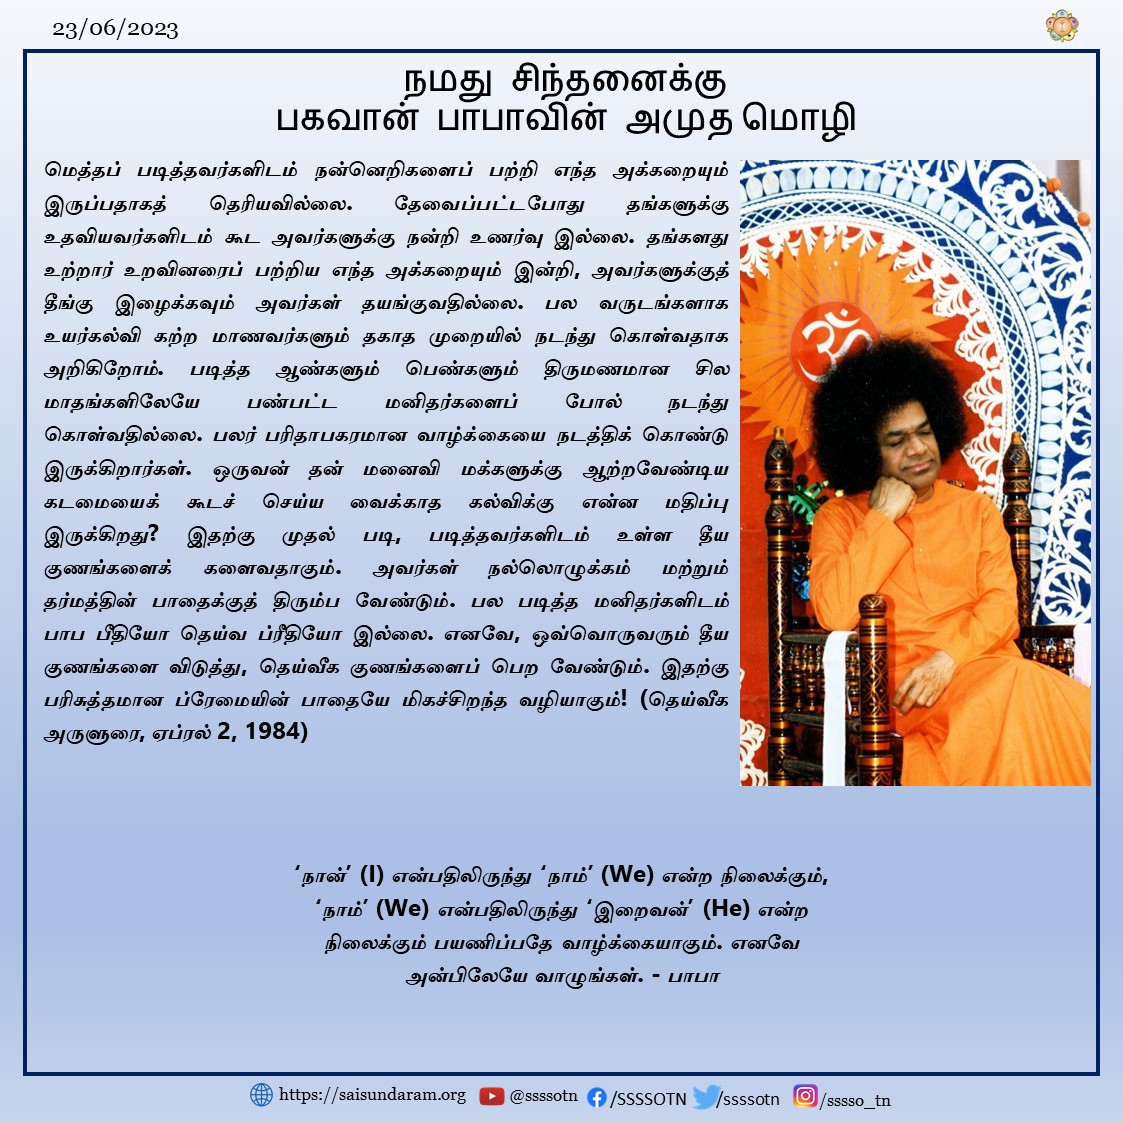 Thought For the Day | 23nd June 2023  Our Most Beloved Bhagawan's Divine Message As Written in Prashanthi Nilayam, Puttaparthi. Divine Discourse - April 2, 1984  #SriSathyaSai #SriSathyaSaibaba #SriSathyaSai #ThoughtforTheDay #Divinemessage